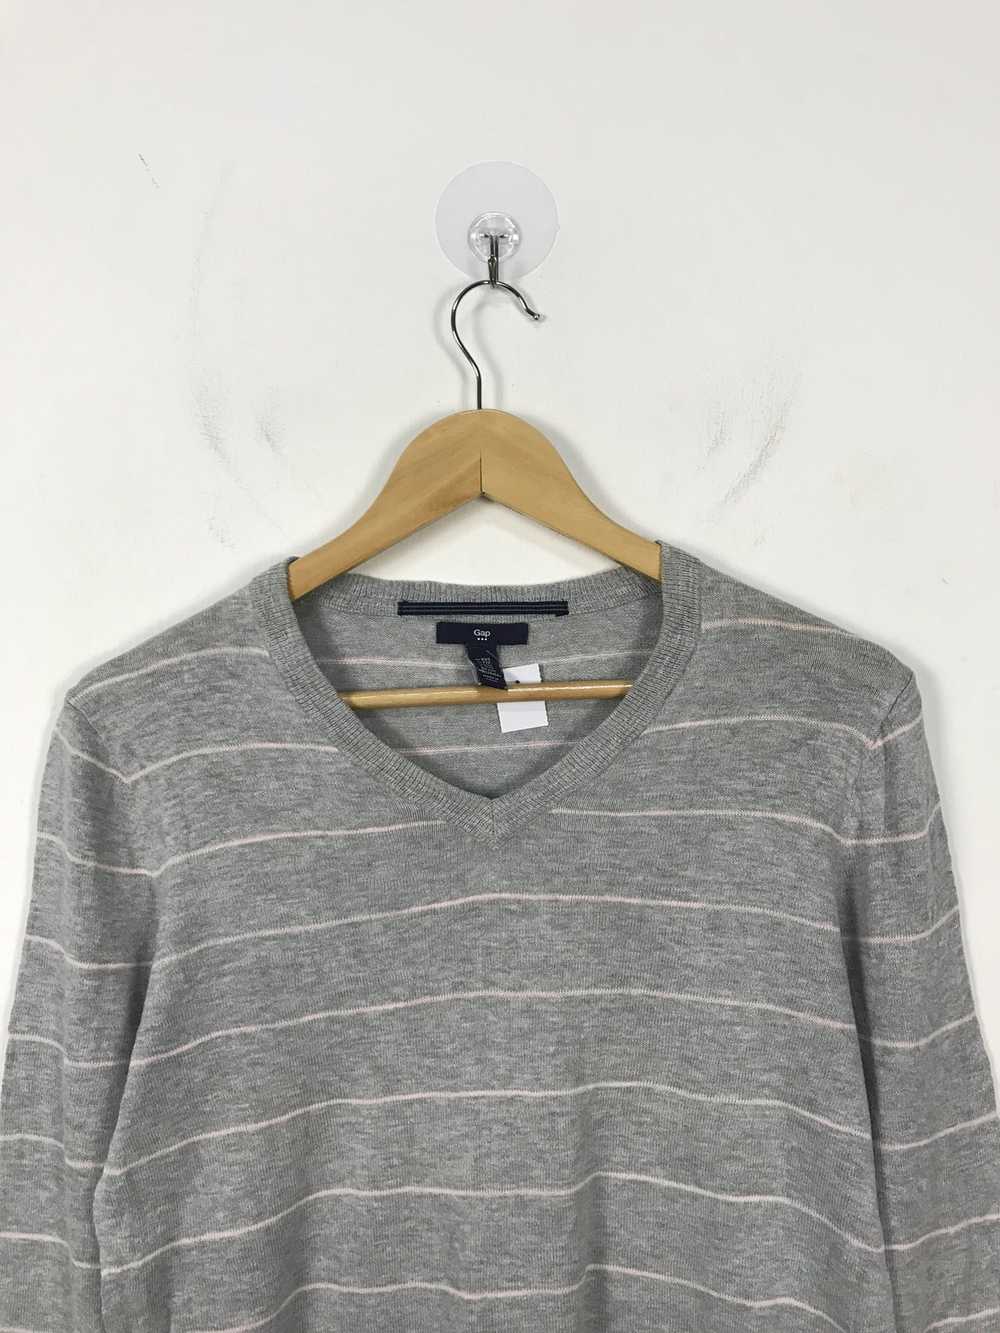 Gap × Japanese Brand × Other Gap Striped Meticulo… - image 2